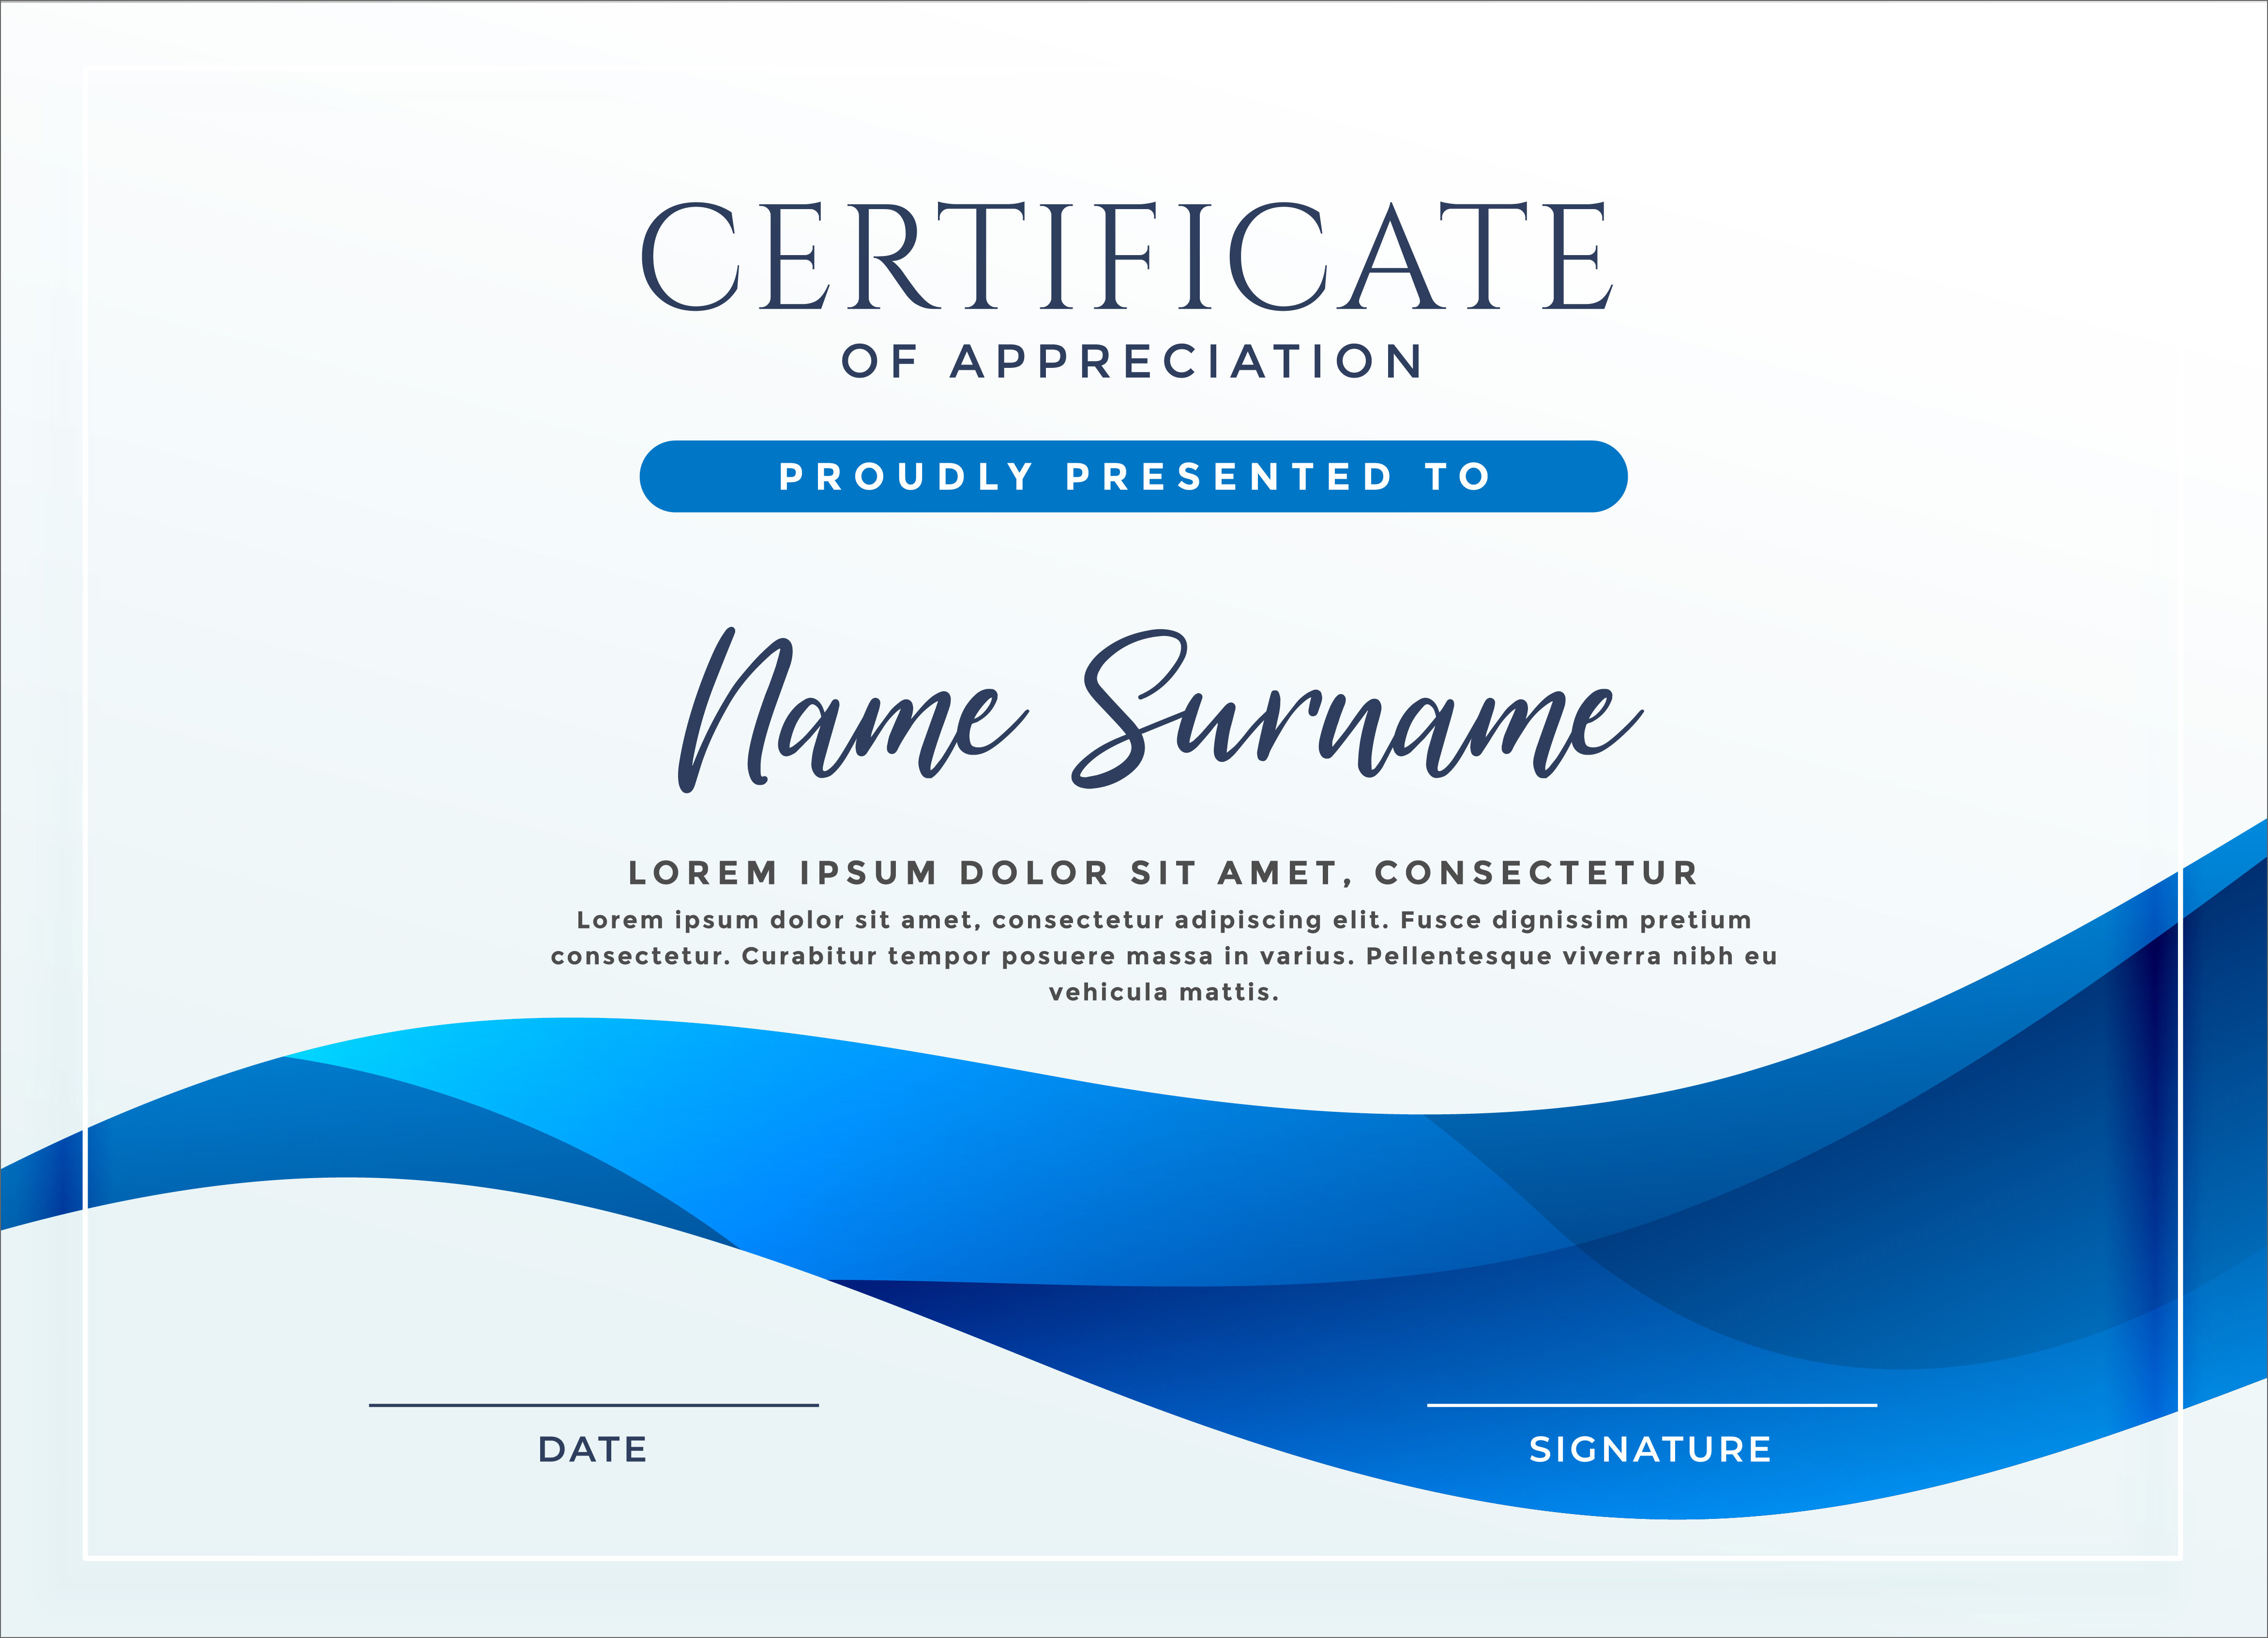 32-free-creative-blank-certificate-templates-in-psd-photoshop-vector-illustrator